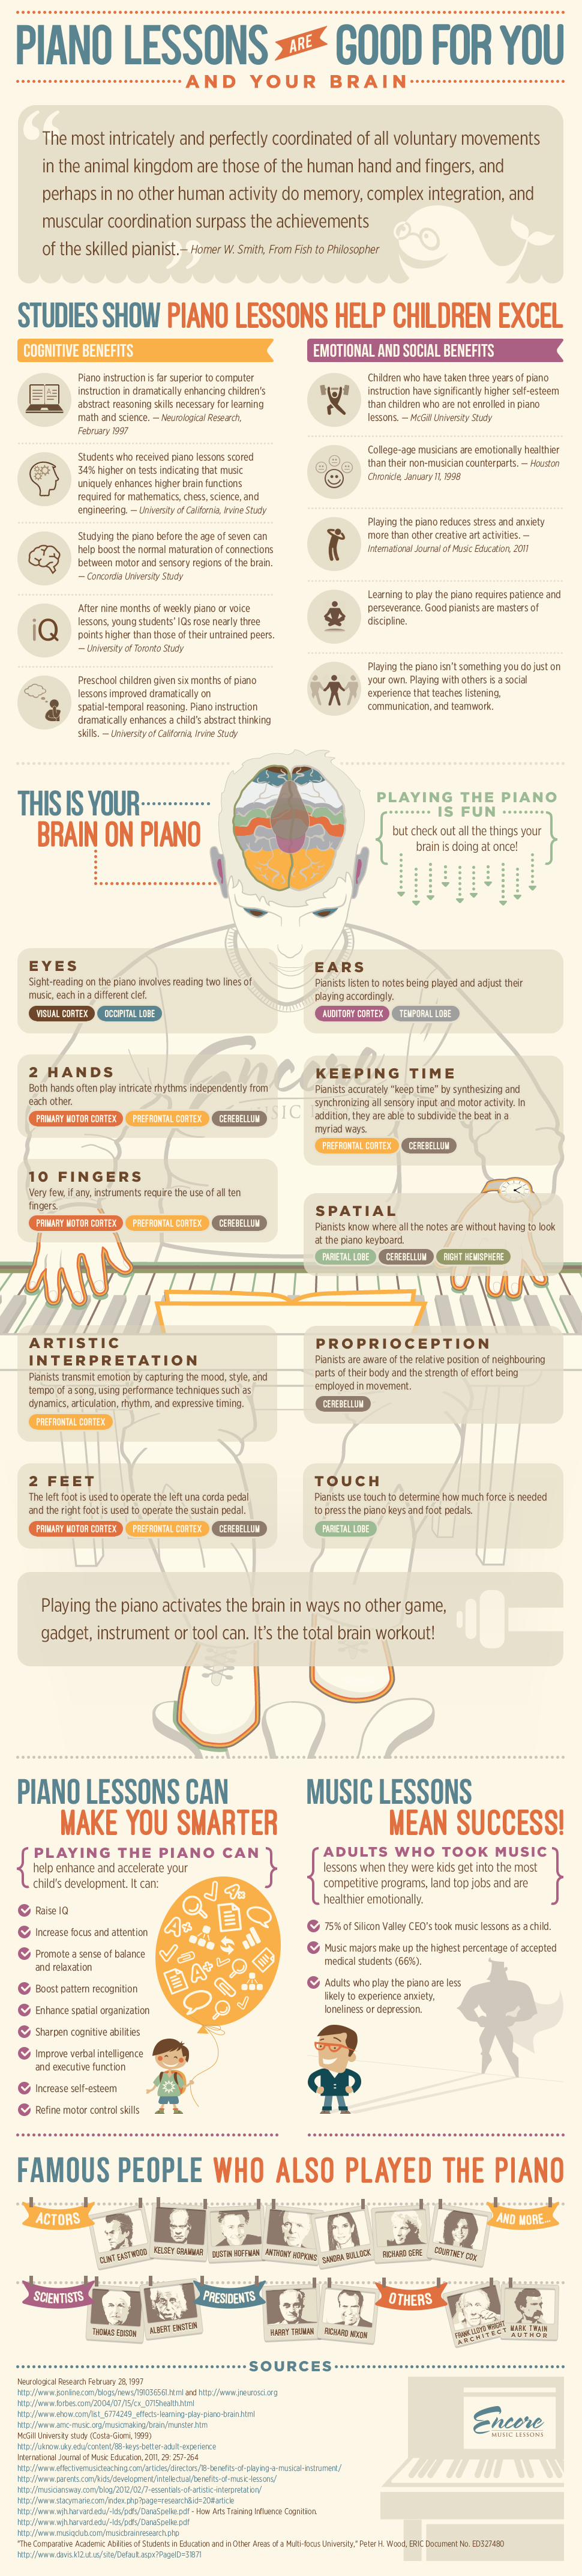 infographic-piano-lessons-are-good-for-you-and-your-brain.png